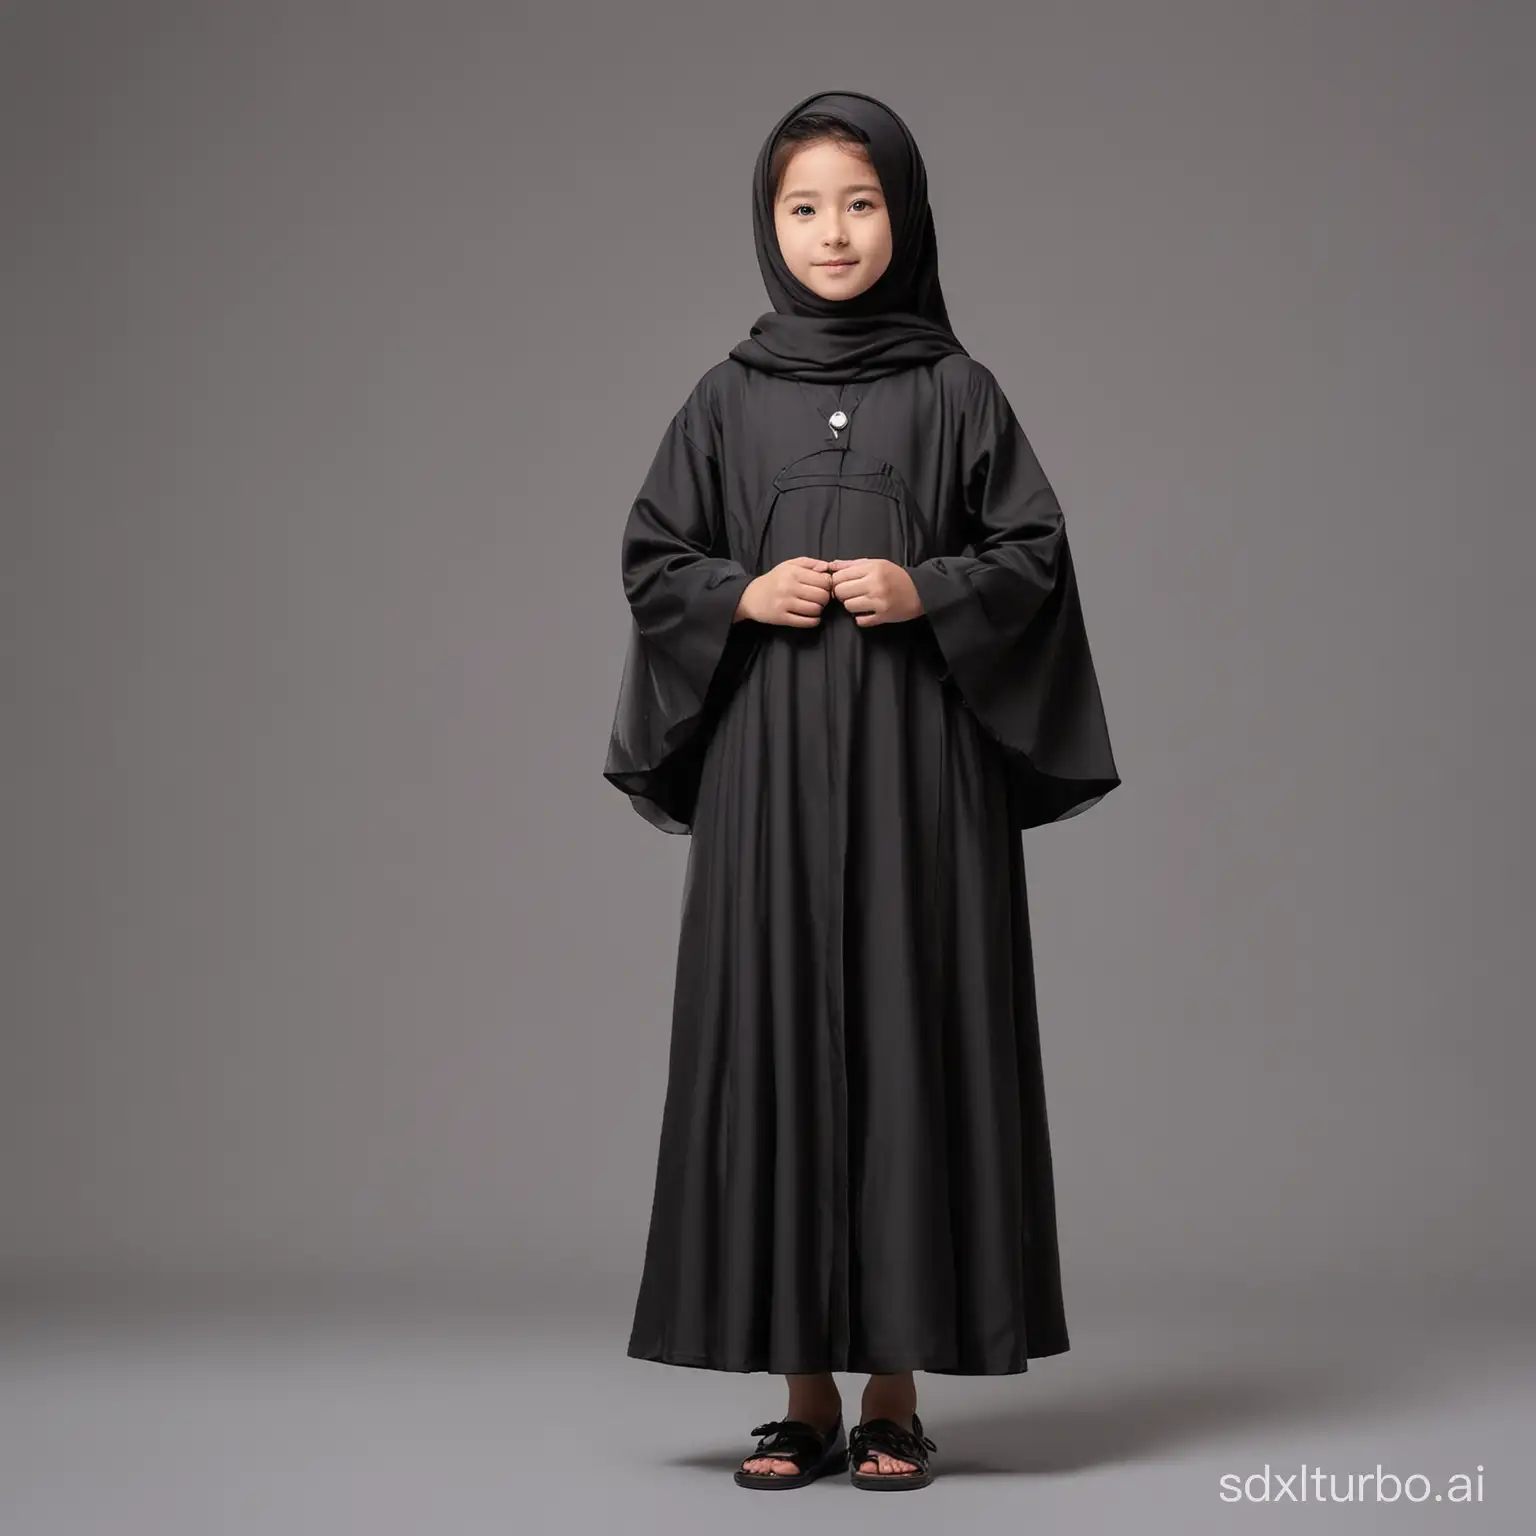 Little child japanese muslimah wearing abaya, game character, stands at full height